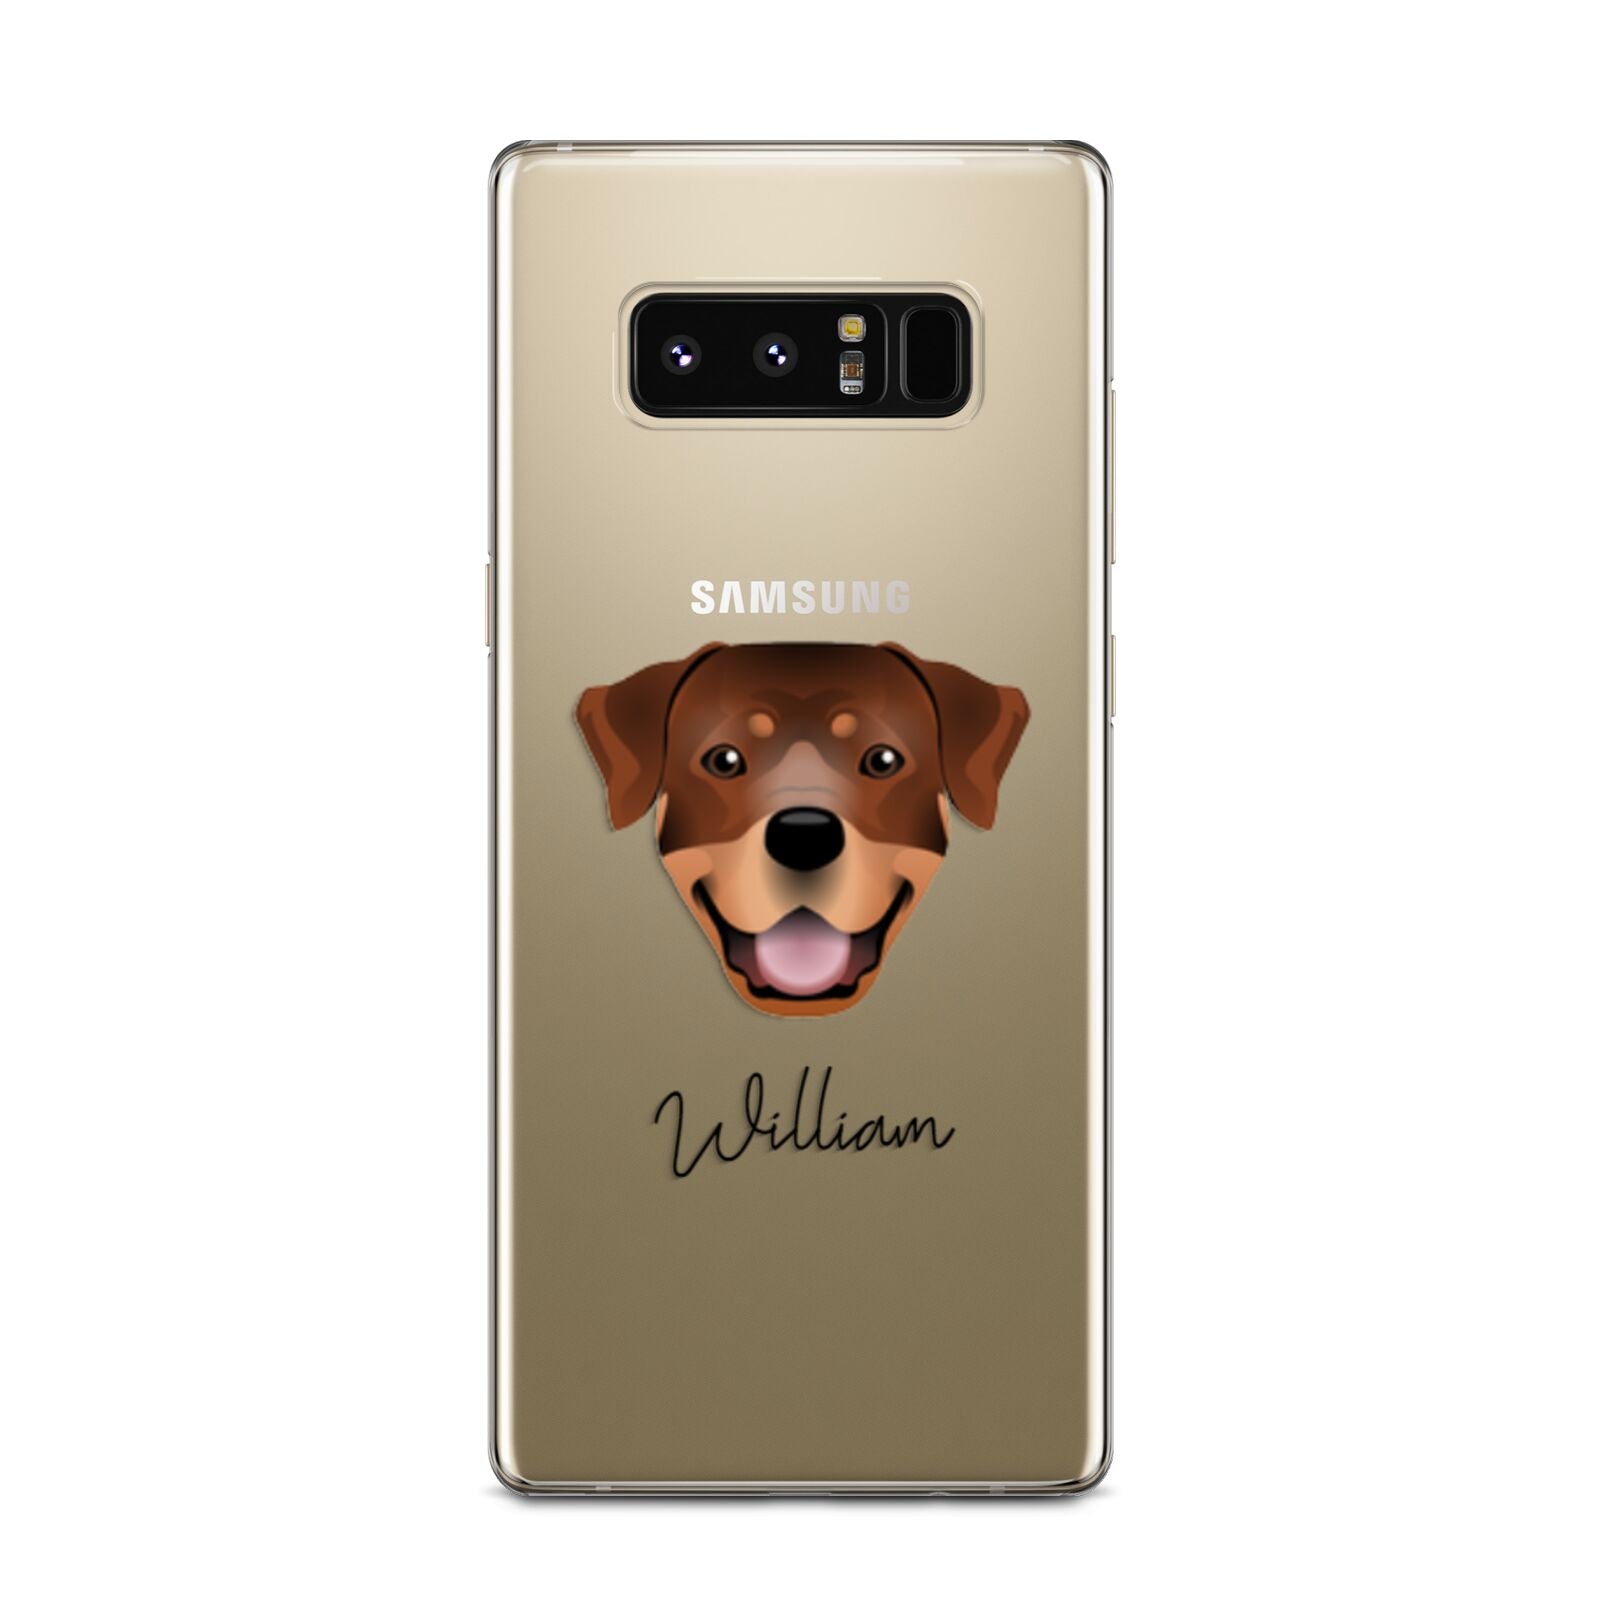 Rottweiler Personalised Samsung Galaxy Note 8 Case